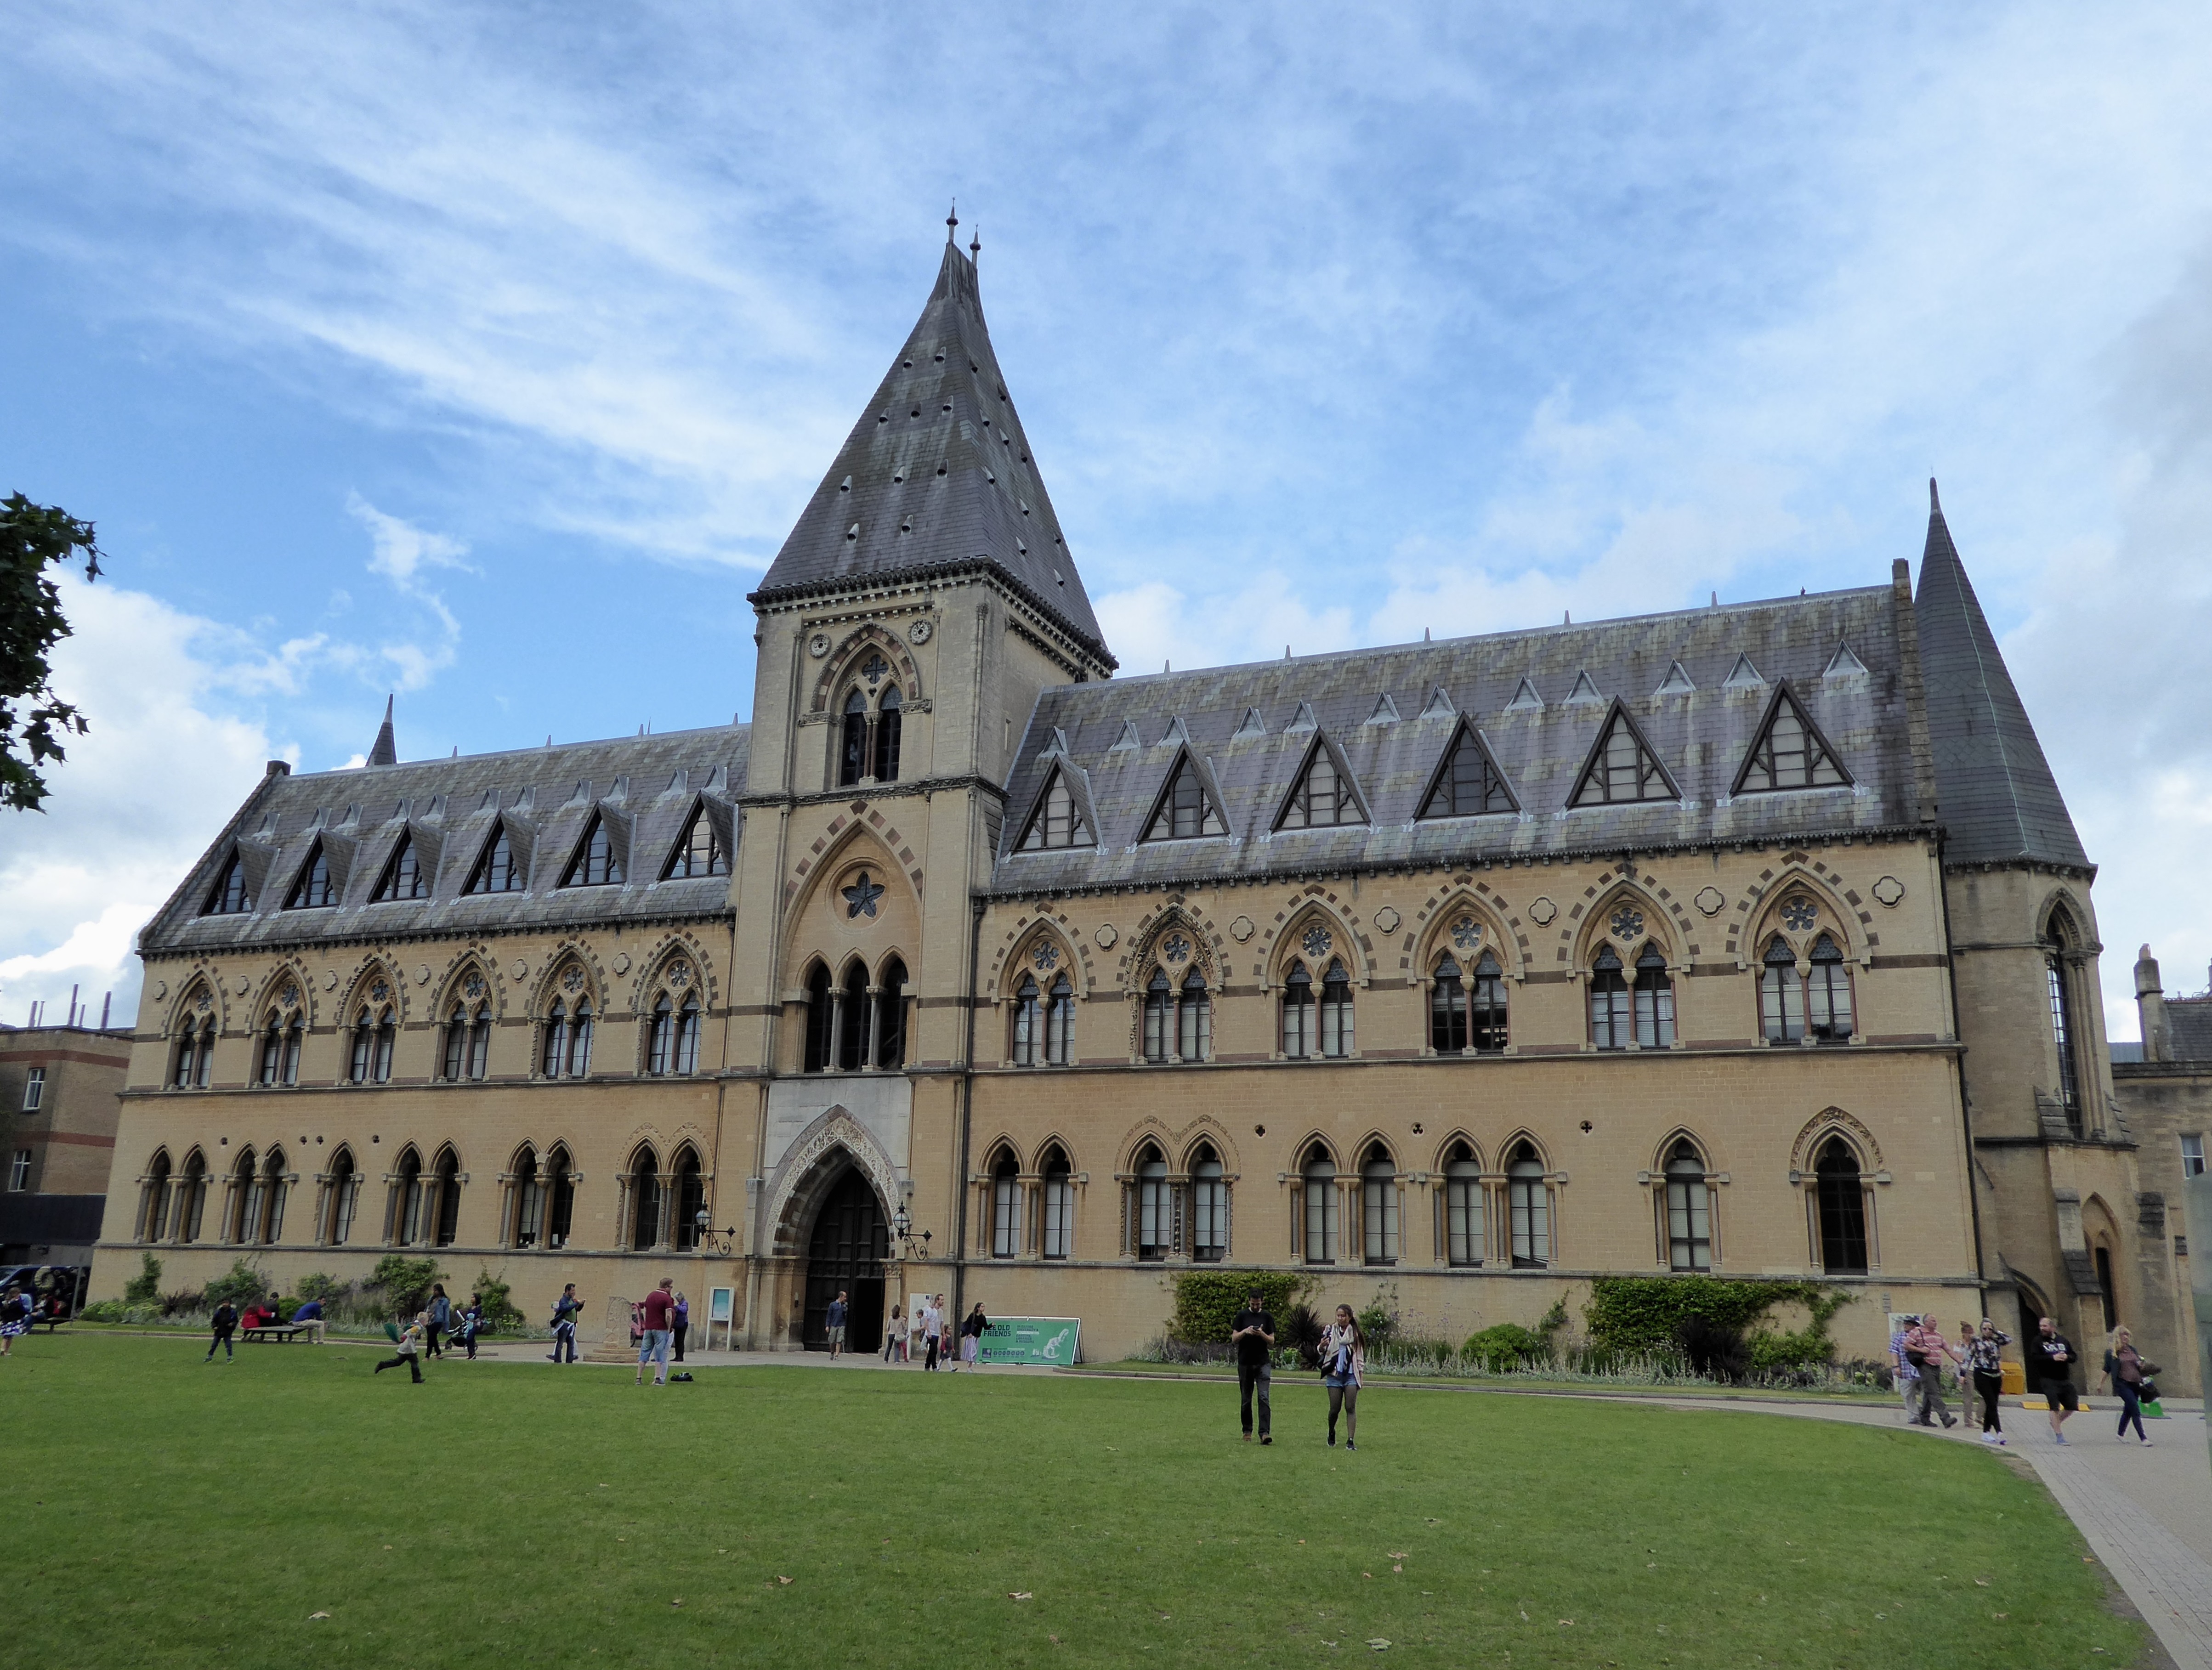 History of the University of Oxford